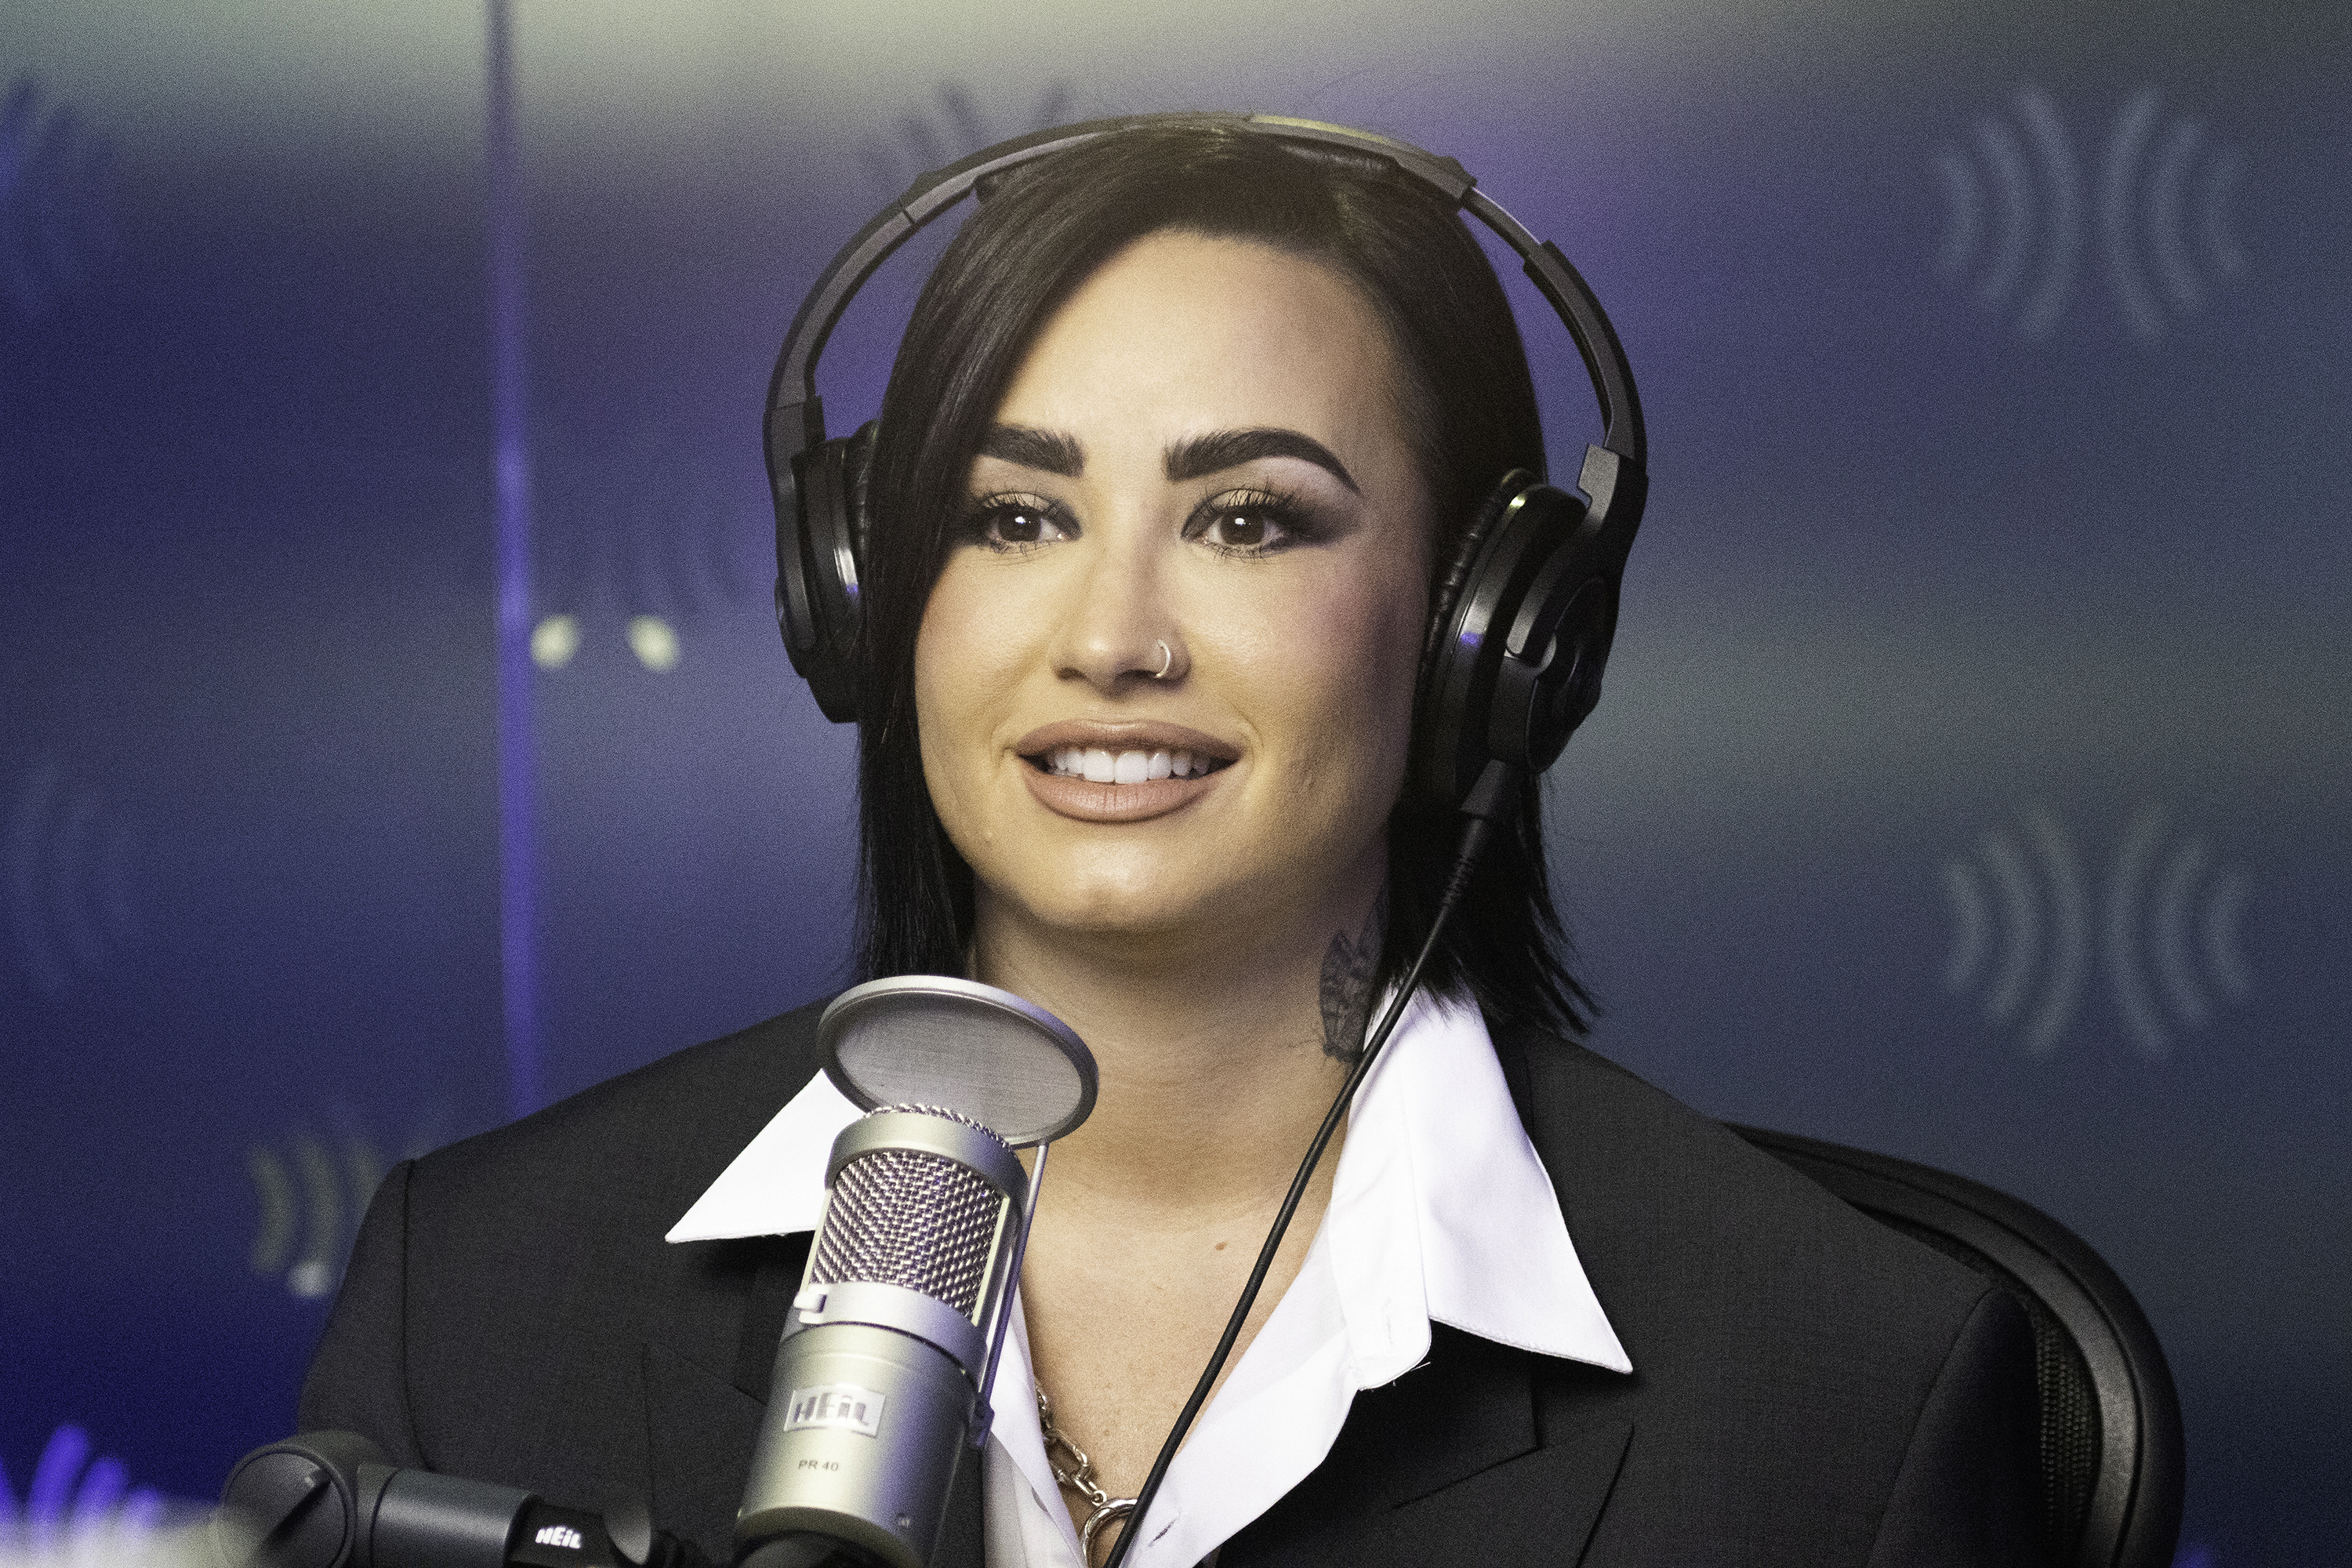 Her giving a radio interview